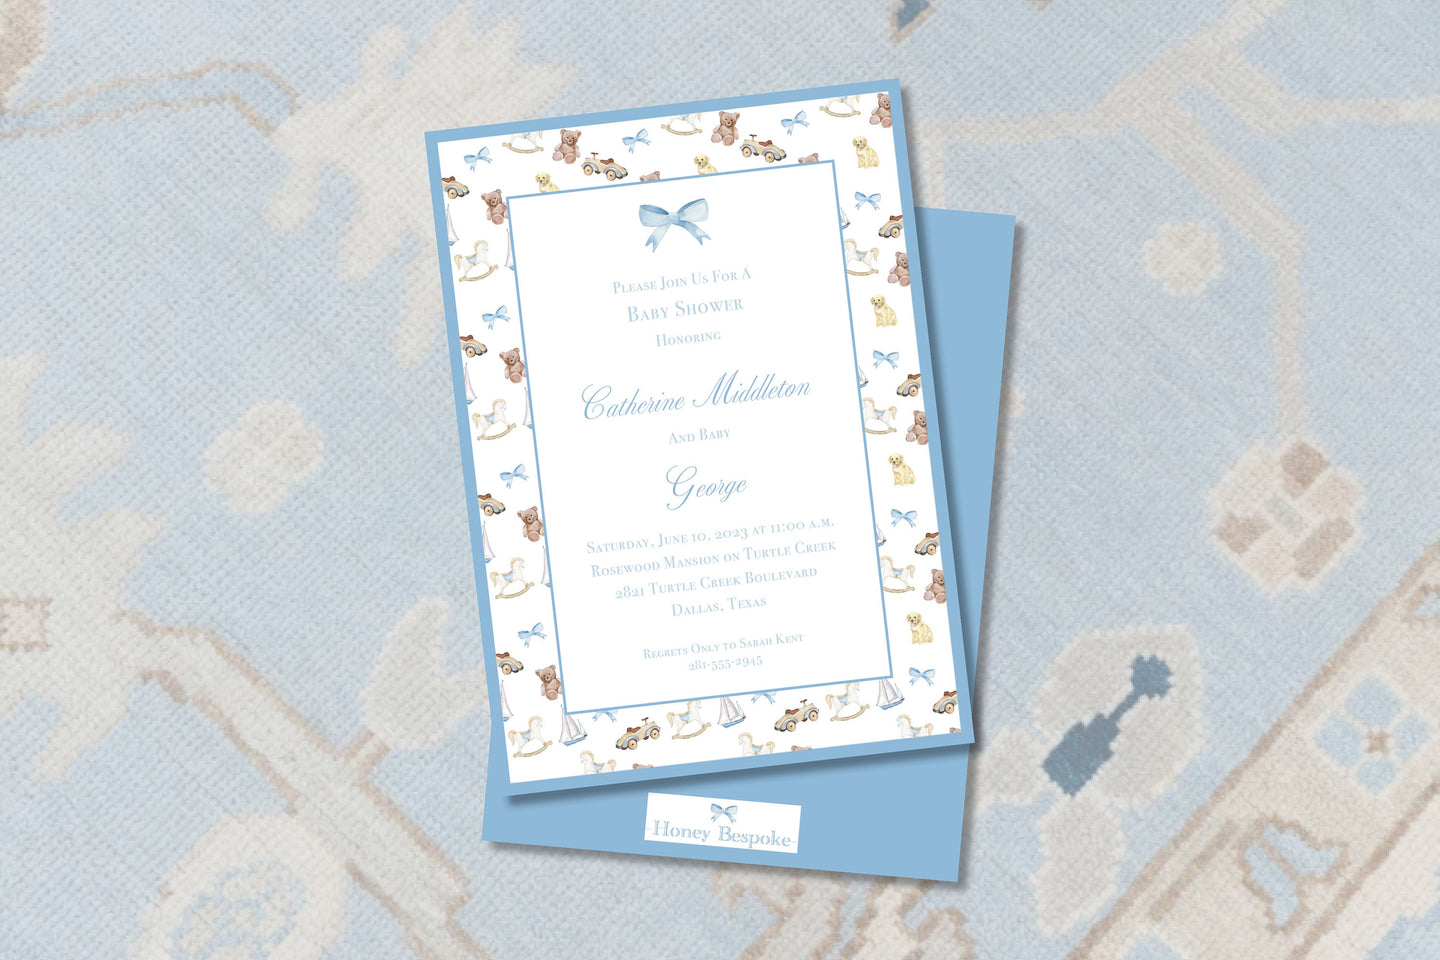 Classic Watercolor Baby Shower Invitation / Preppy Baby Shower Invitation / Snips and Snails / Puppy Dog Tails / Blue Baby Invitation